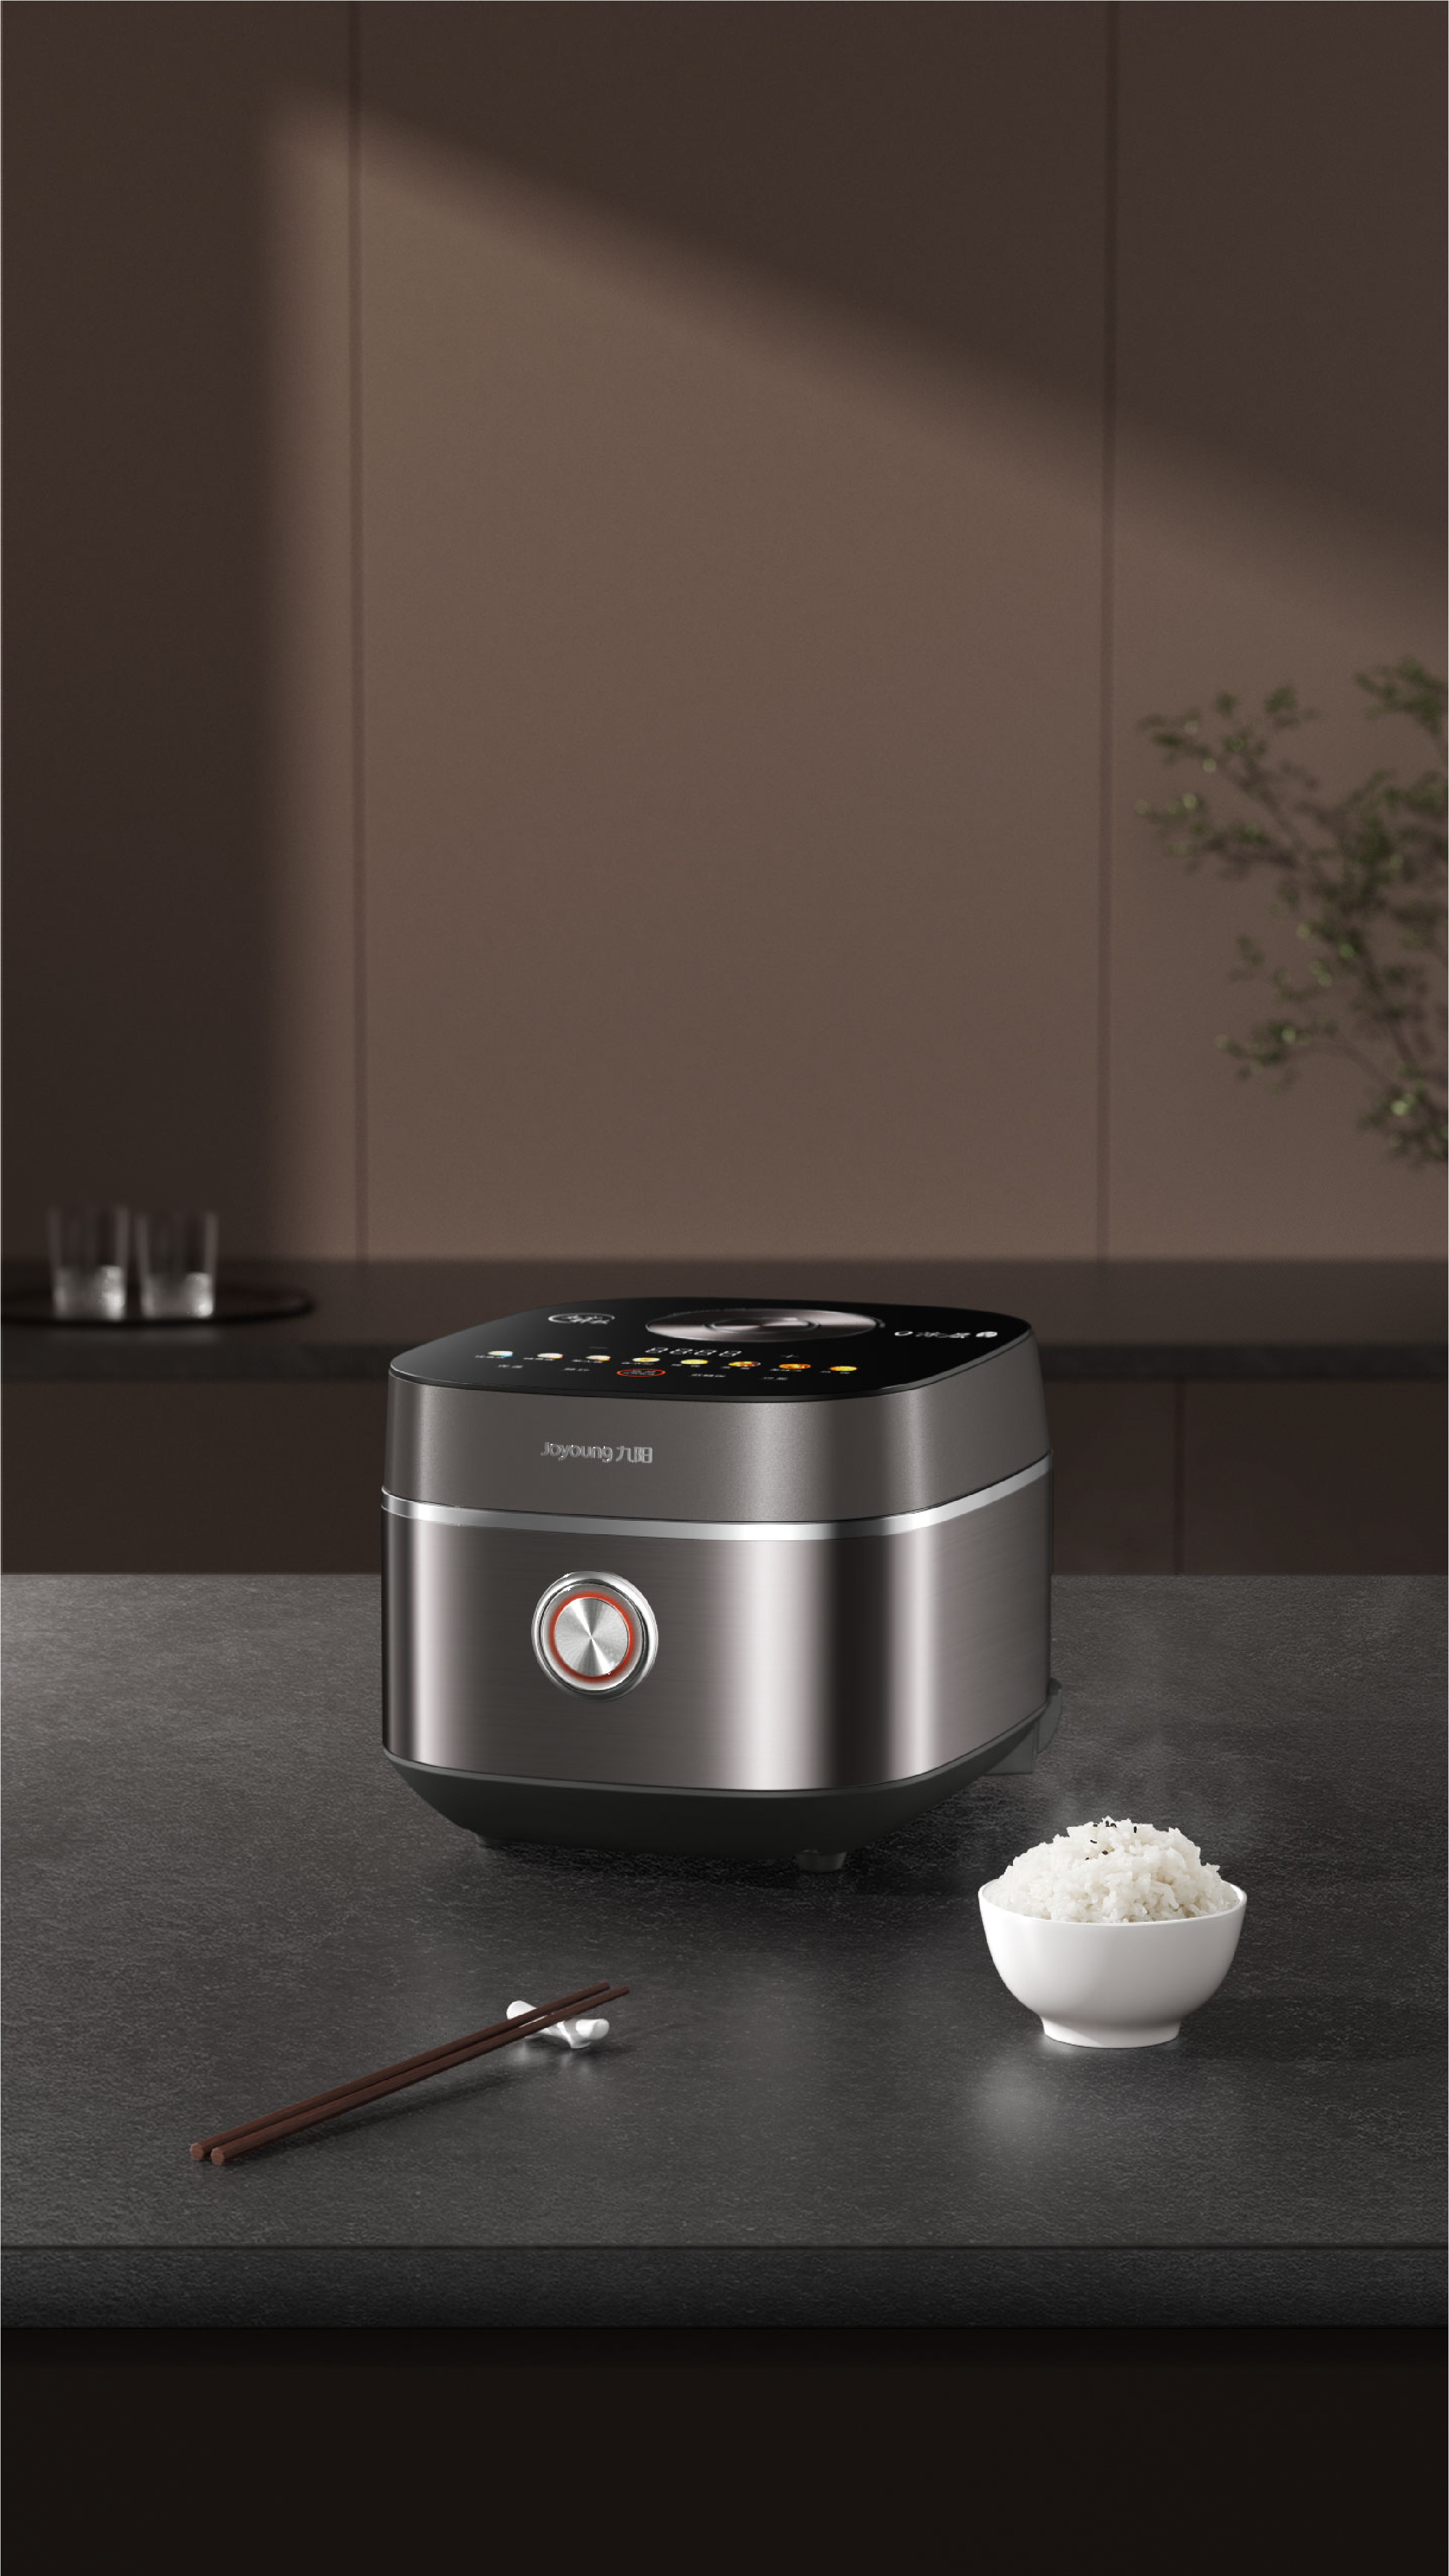 Uncoated rice cooker - 40N7